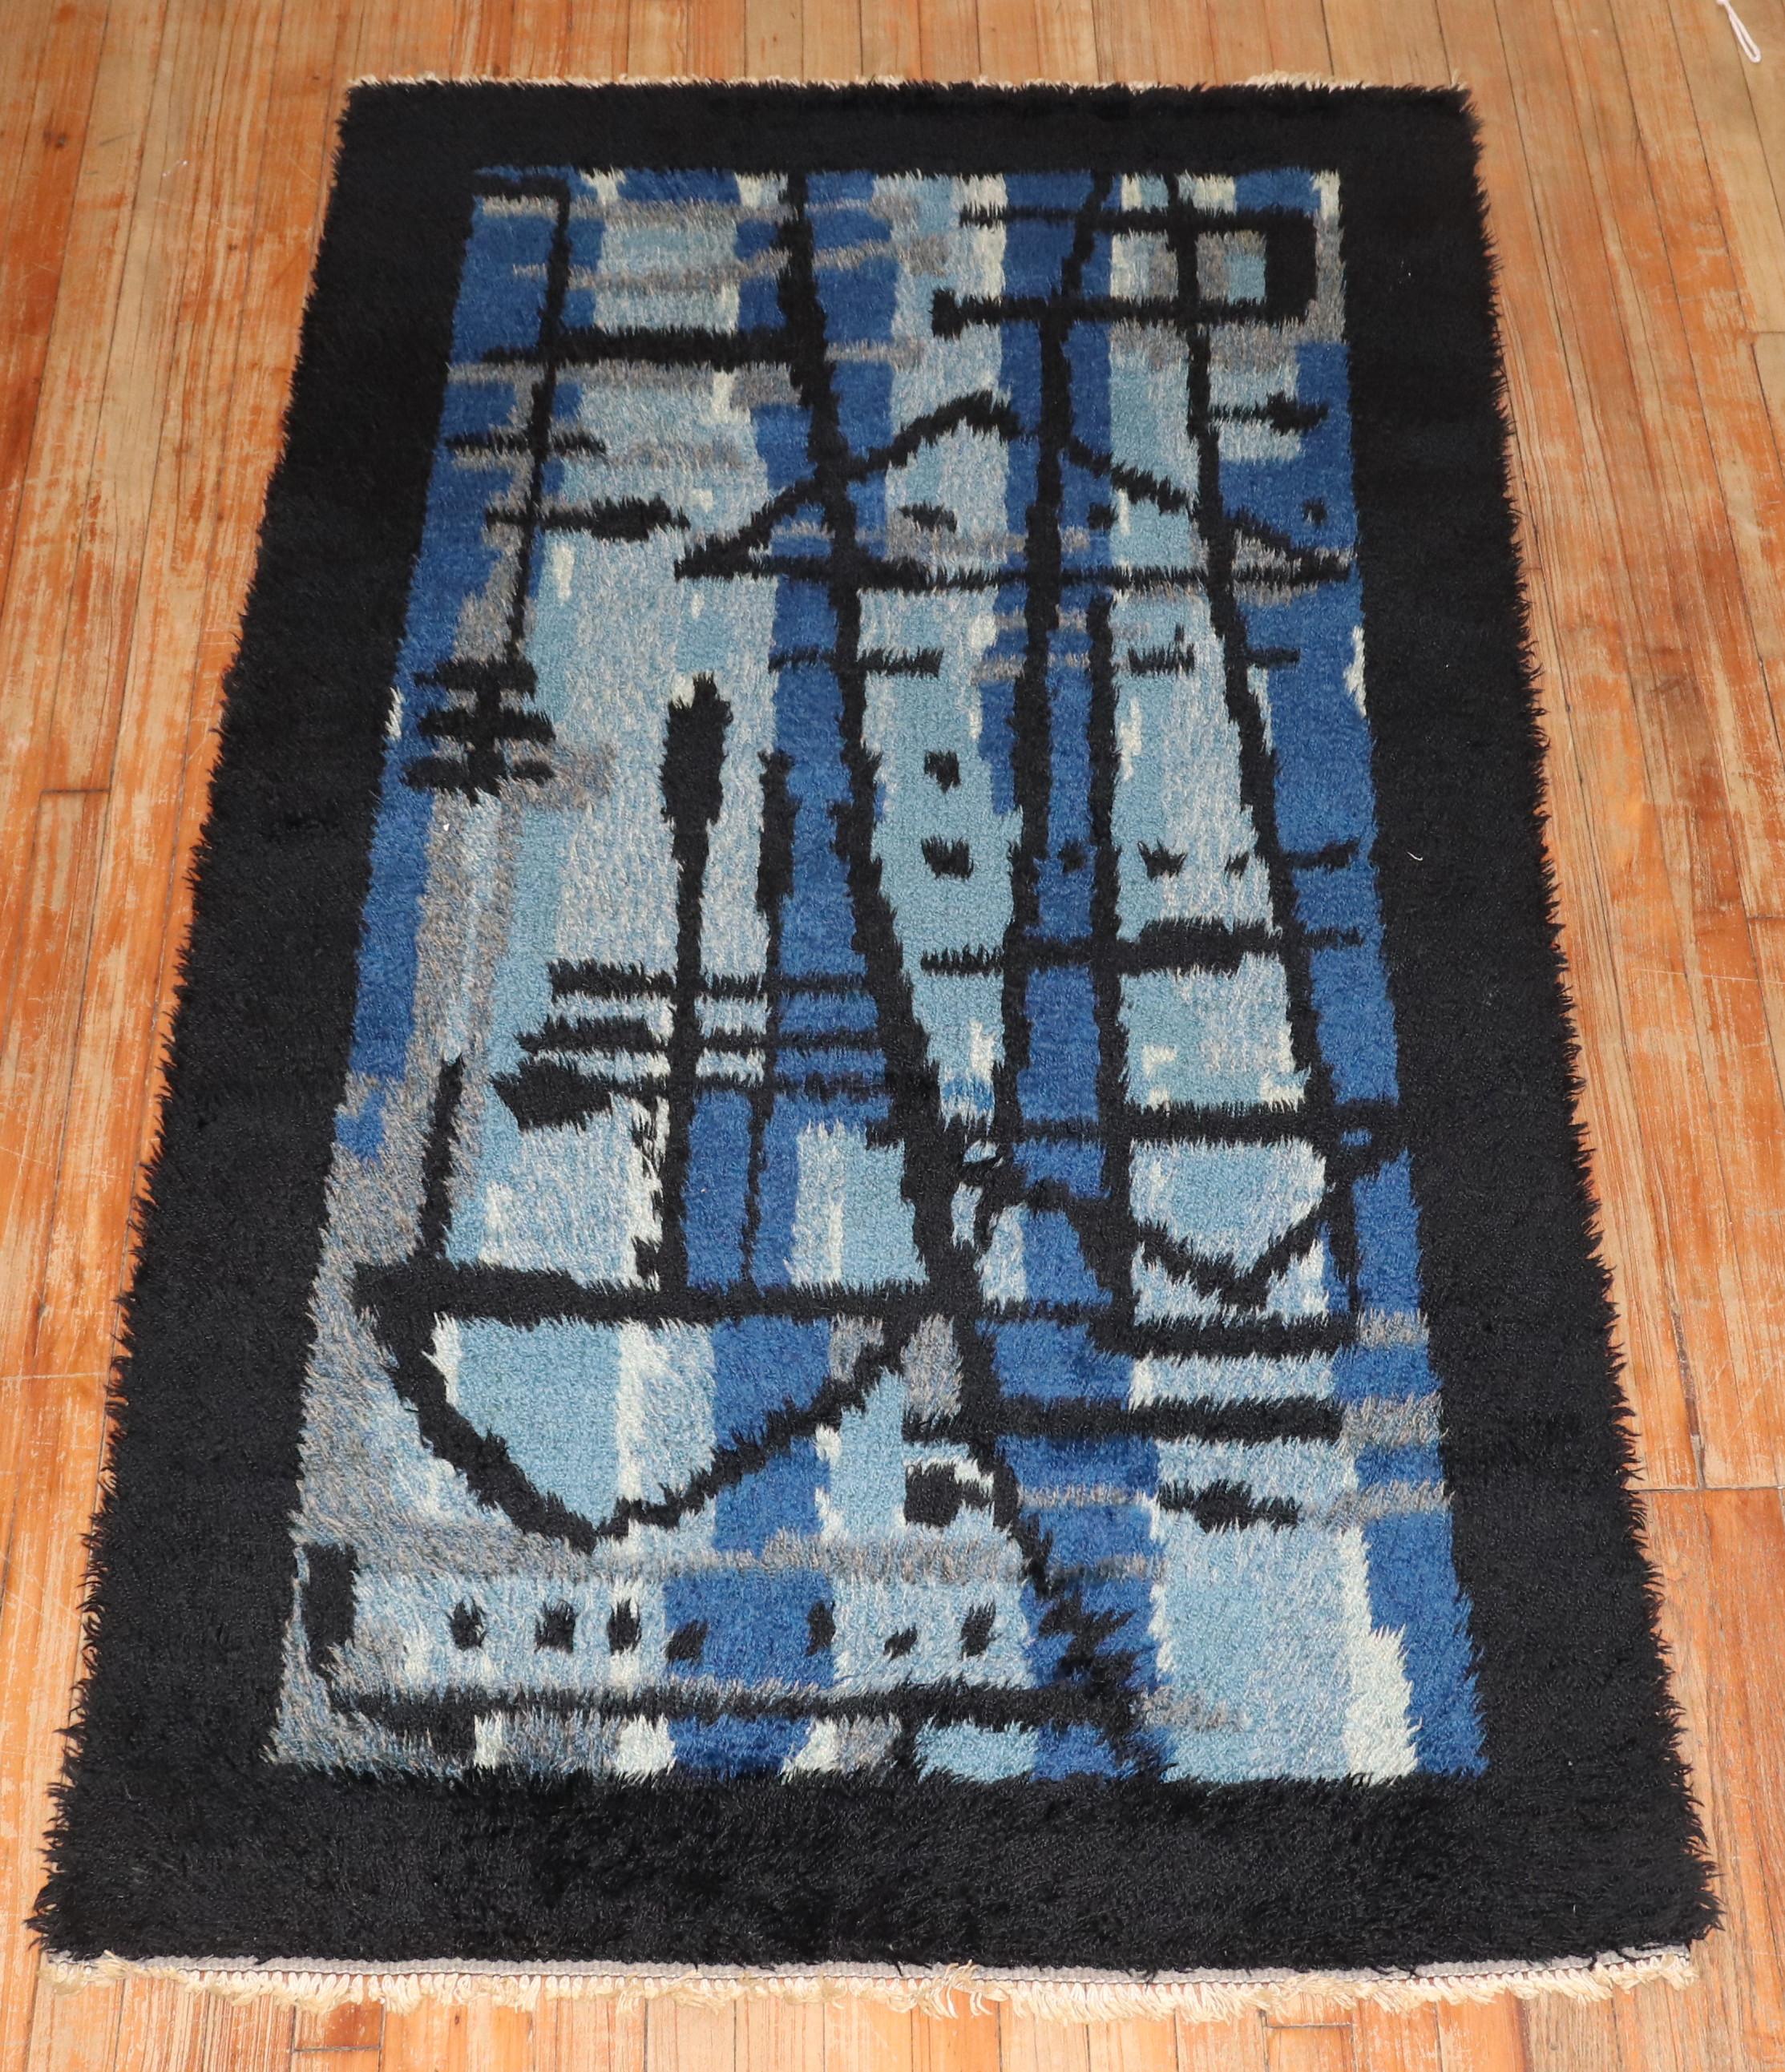 A plush Swedish Rya rug from the Mid-20th Century in various shades of blue and a dark border

Measures: 3'6” x 6'3”

Swedish Rya rugs are extremely colorful, lovely and quite chic and each have their own character to them. They tend to have thicker